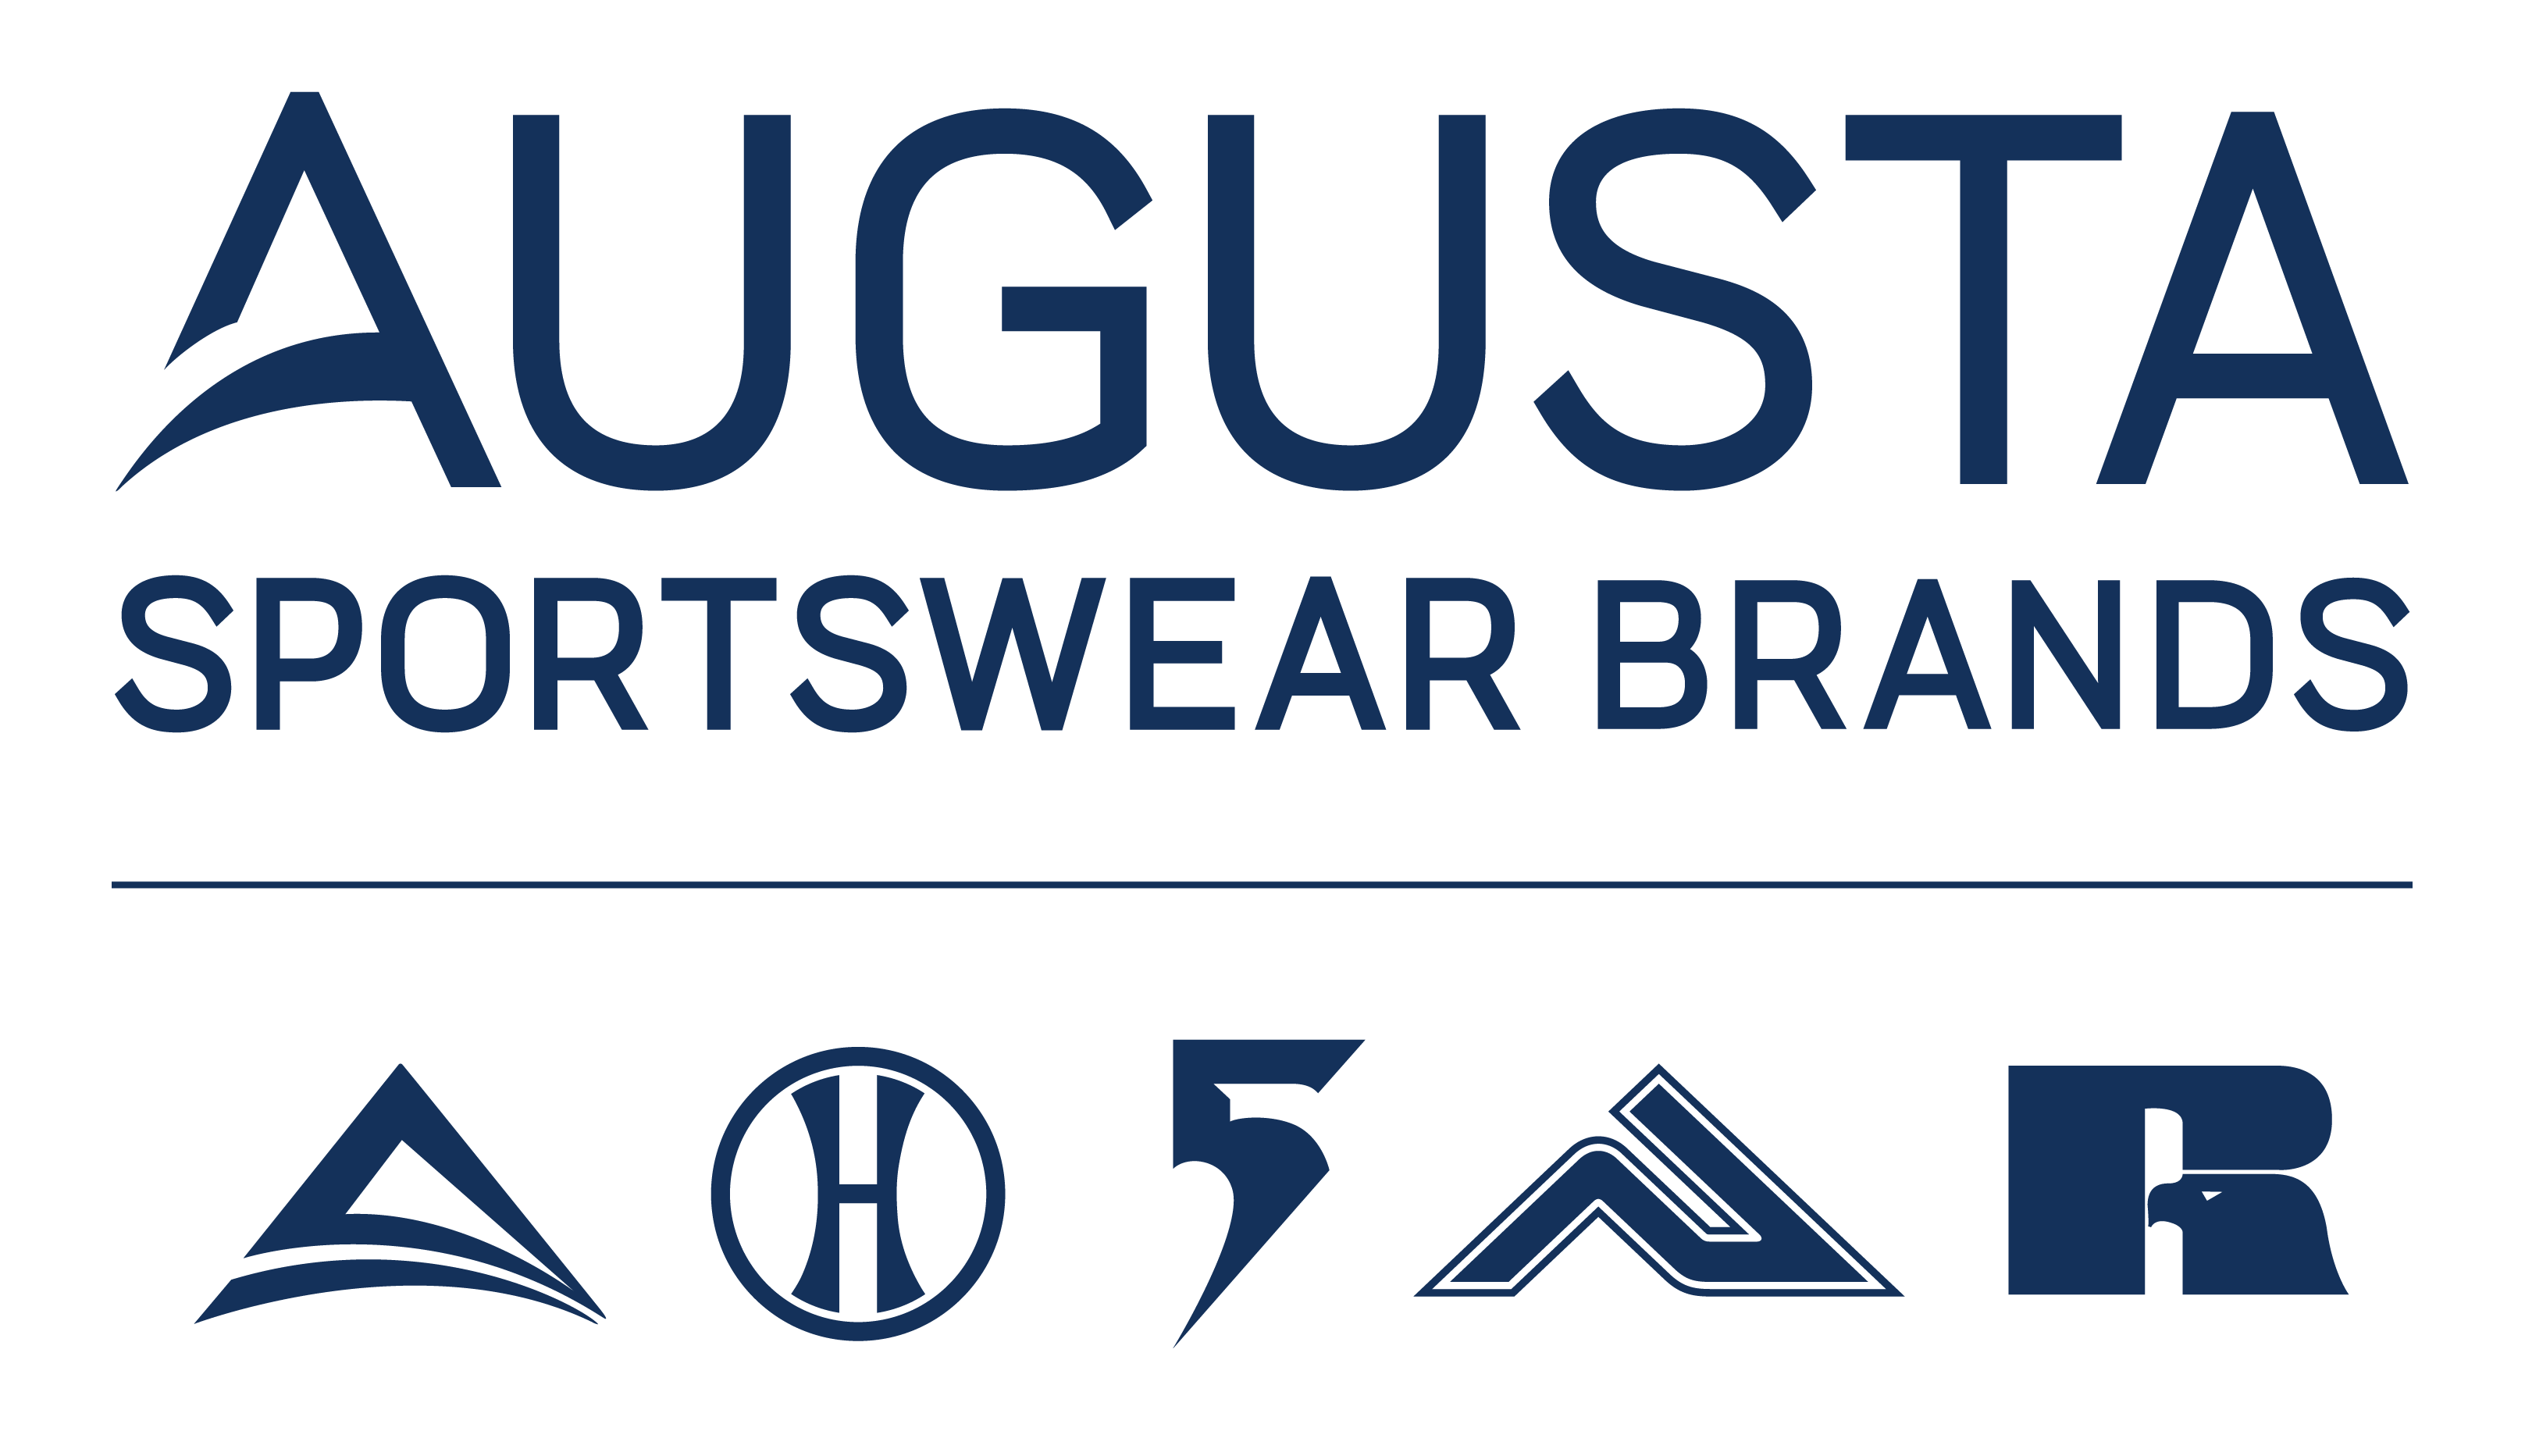 AugustaSportswearBrands_Stacked_withIcons_Navy